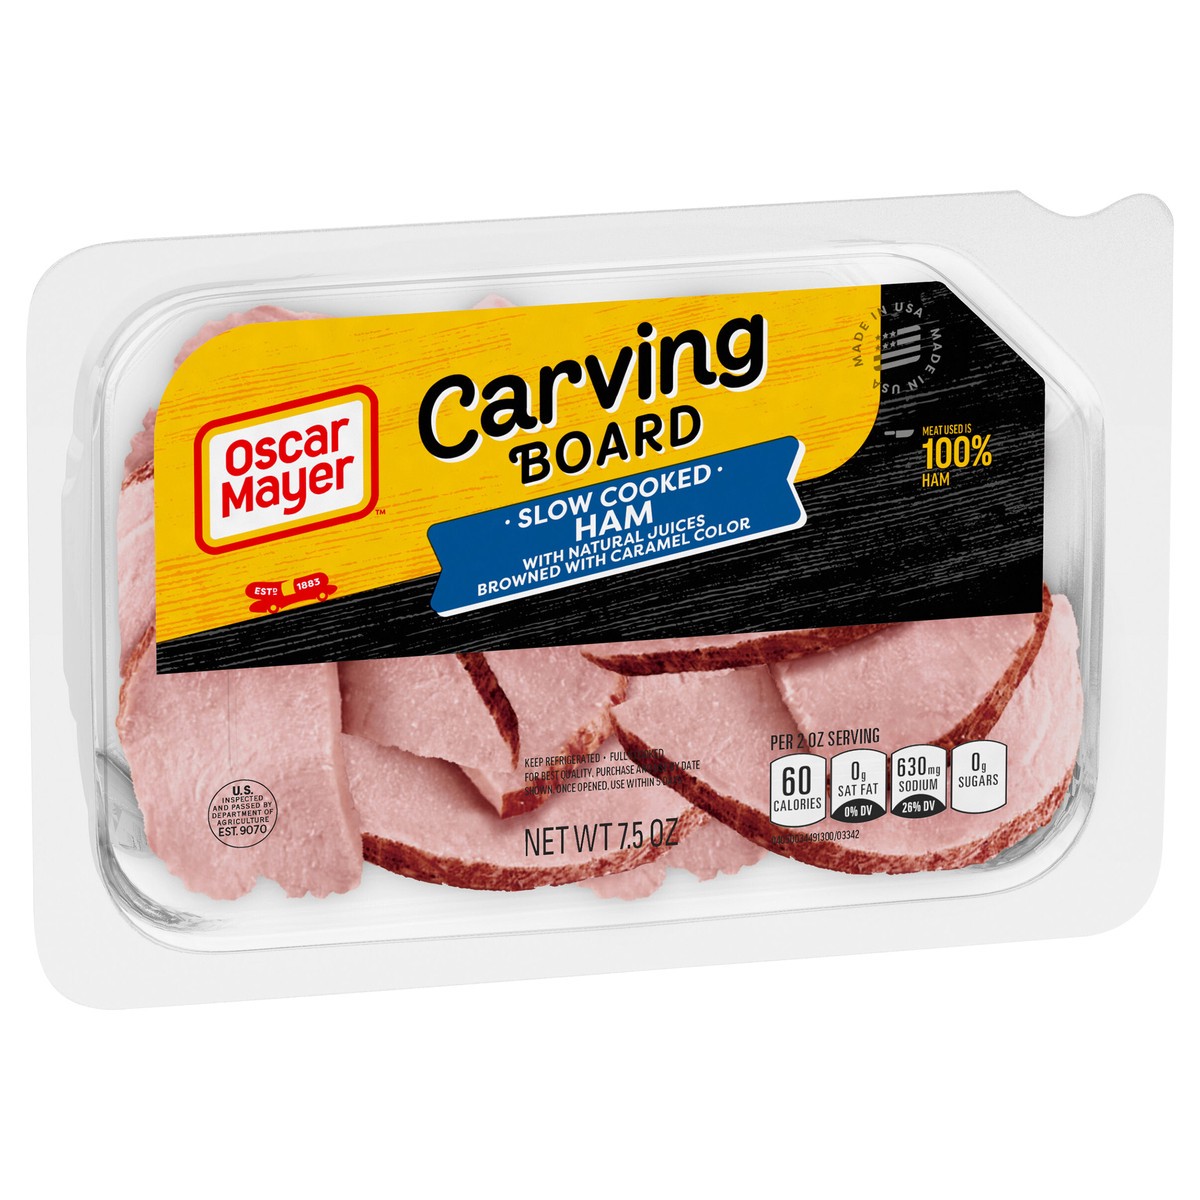 slide 8 of 9, Oscar Mayer Carving Board Slow Cooked Ham Sliced Lunch Meat, 7.5 oz. Tray, 7.5 oz